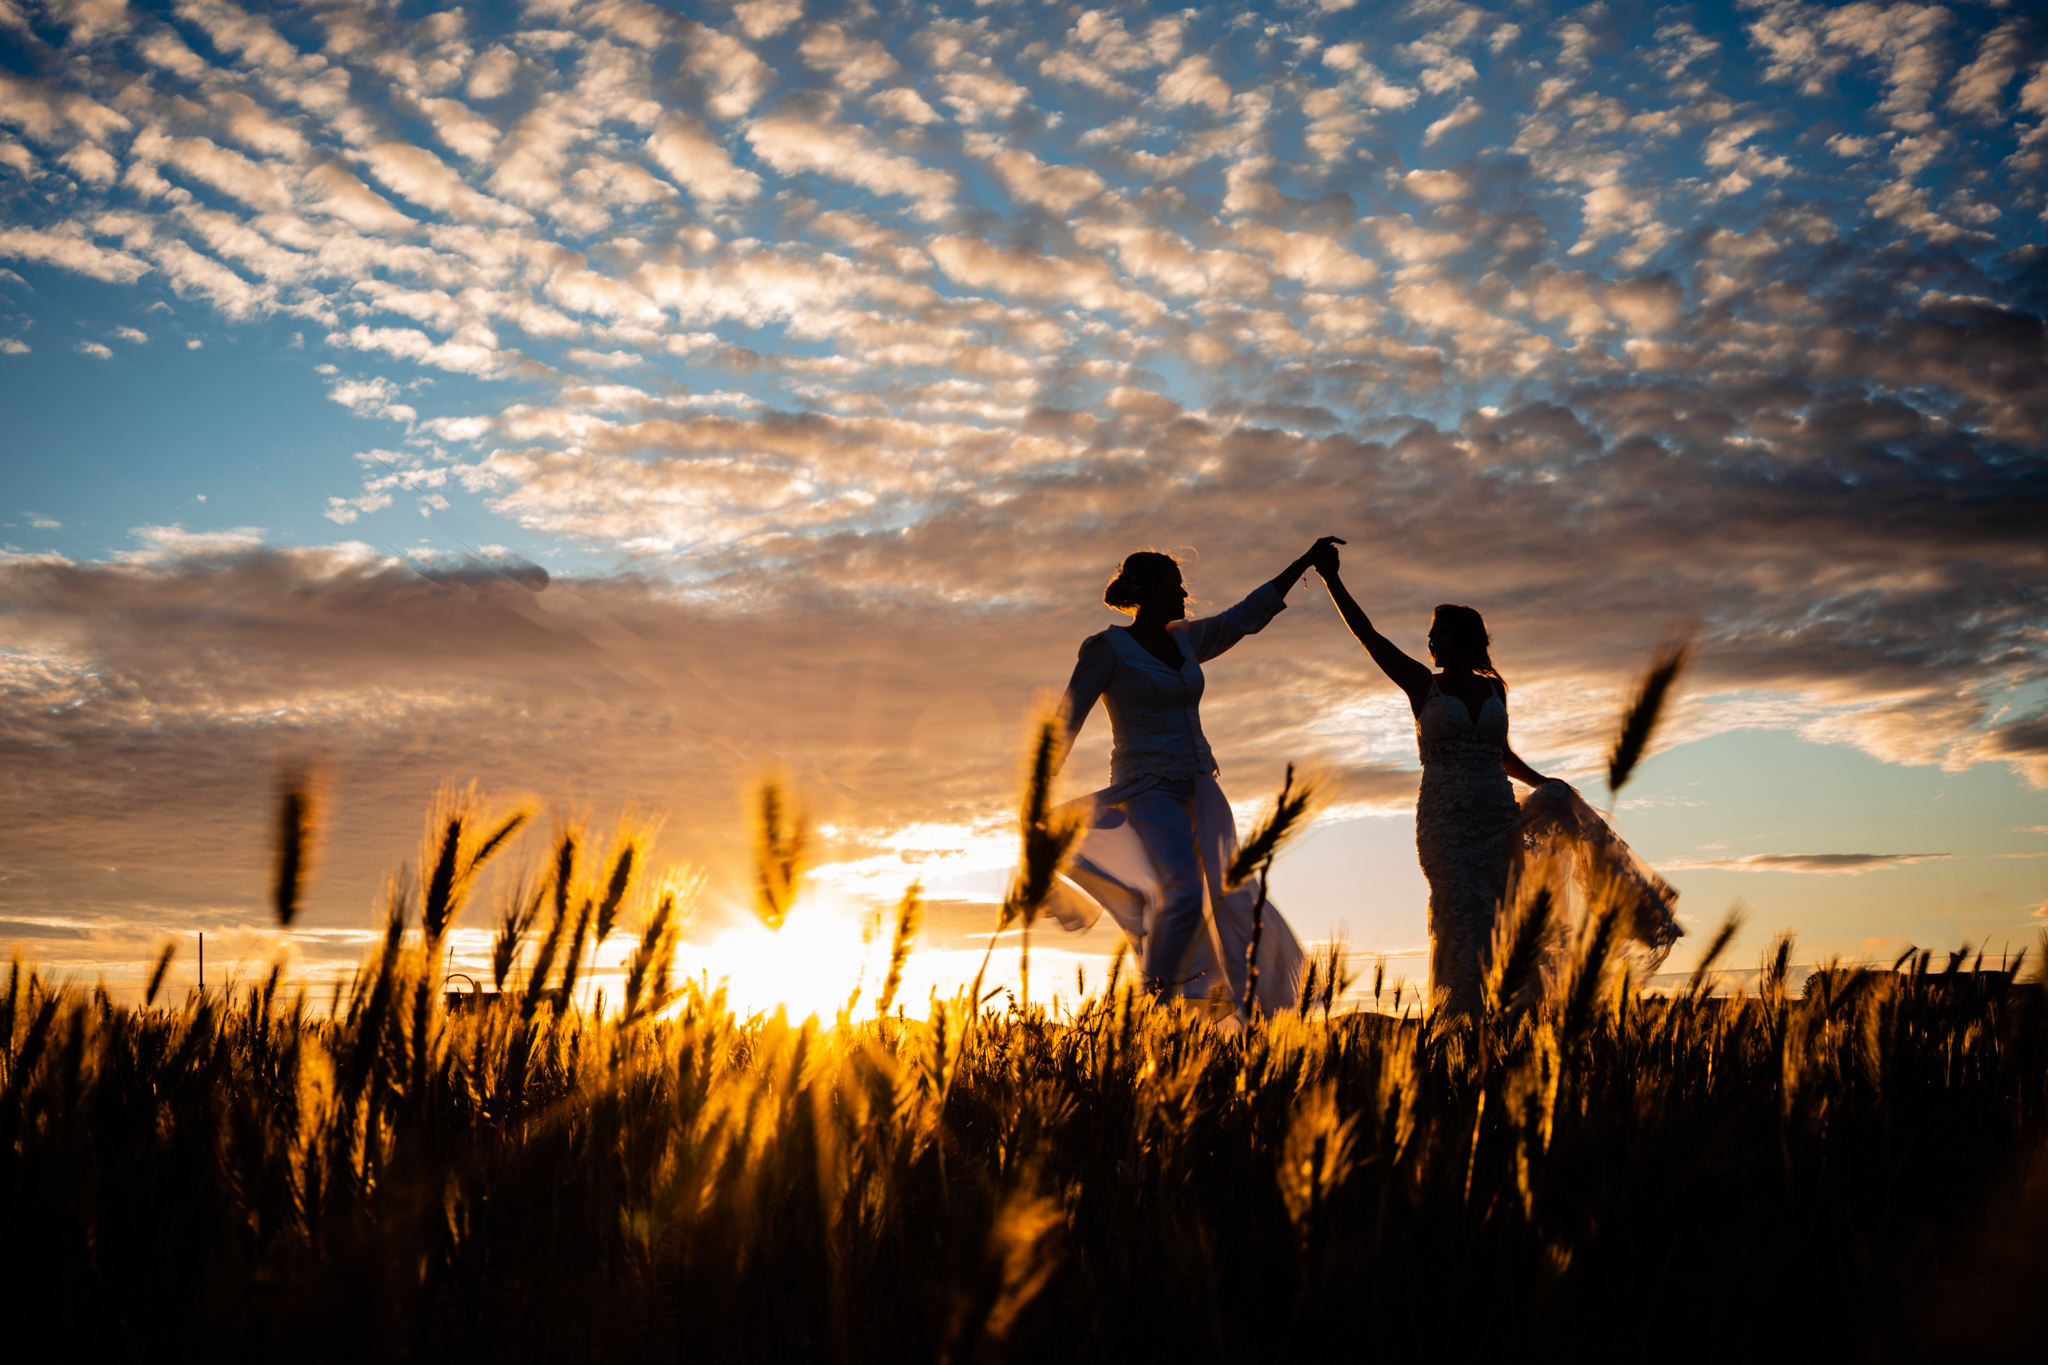 Same sex wedding couple dancing in the sunset. Silhouette of brides in a field of wheat.